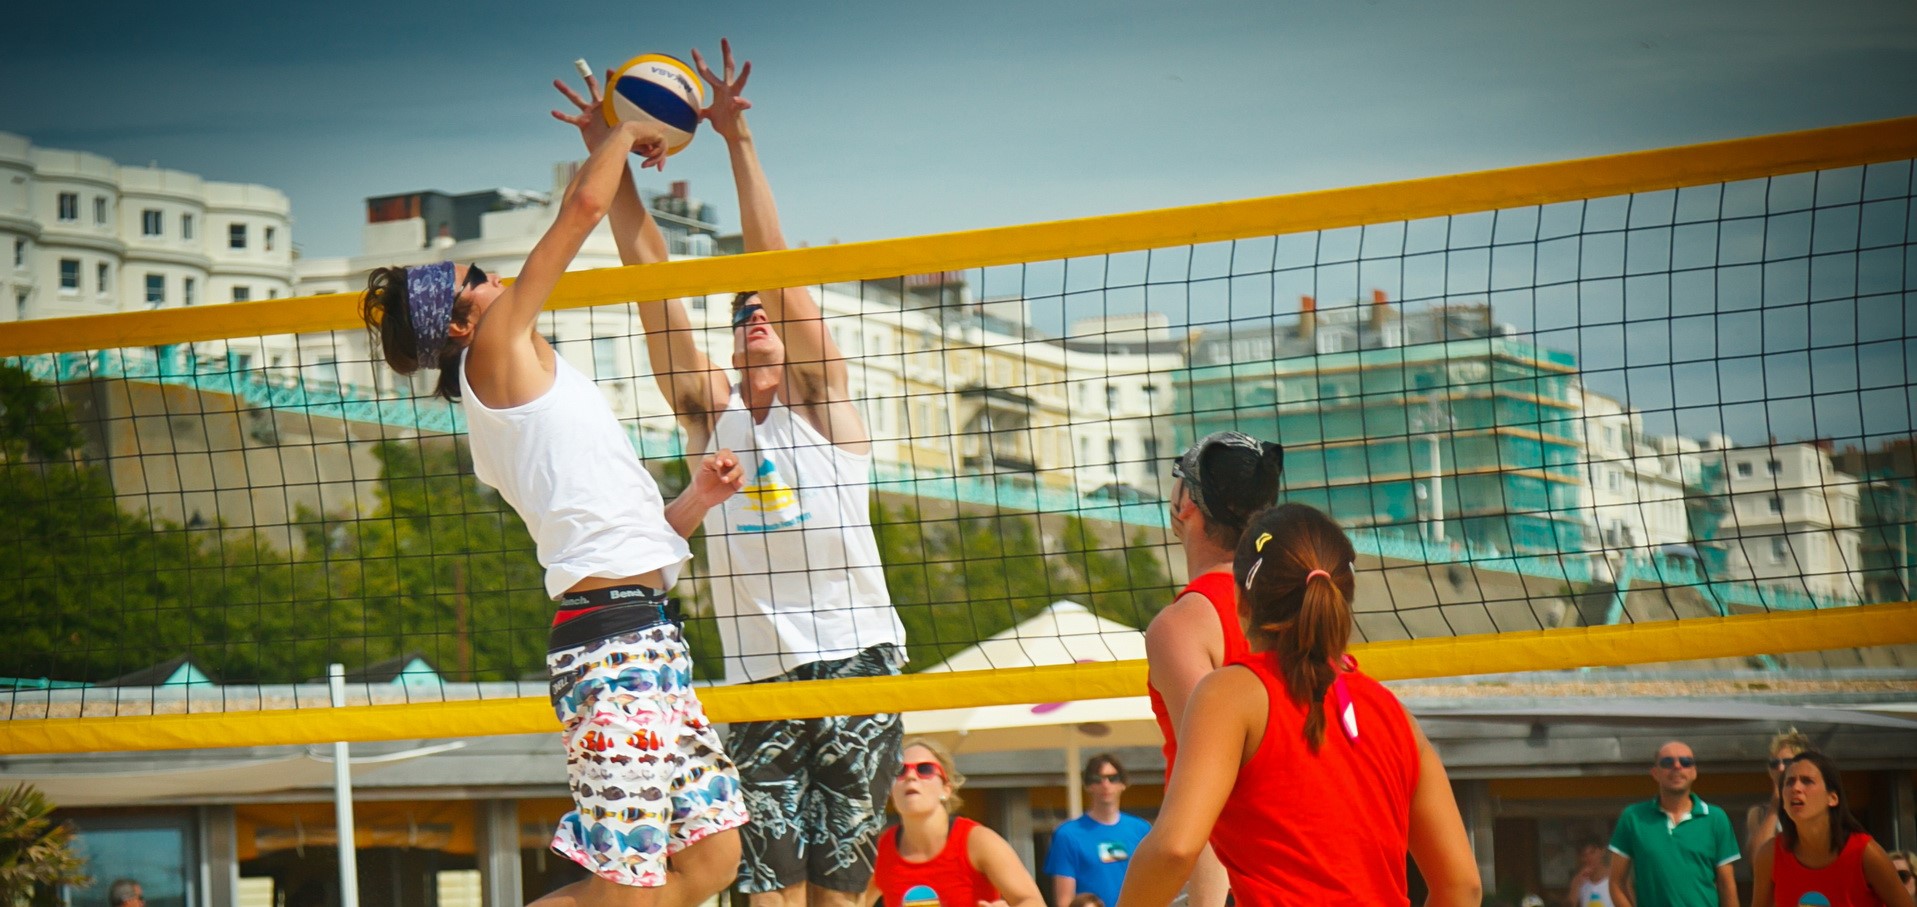 two men jumping on either side of net to reach a volleyball with two girls in red swimsuits watching